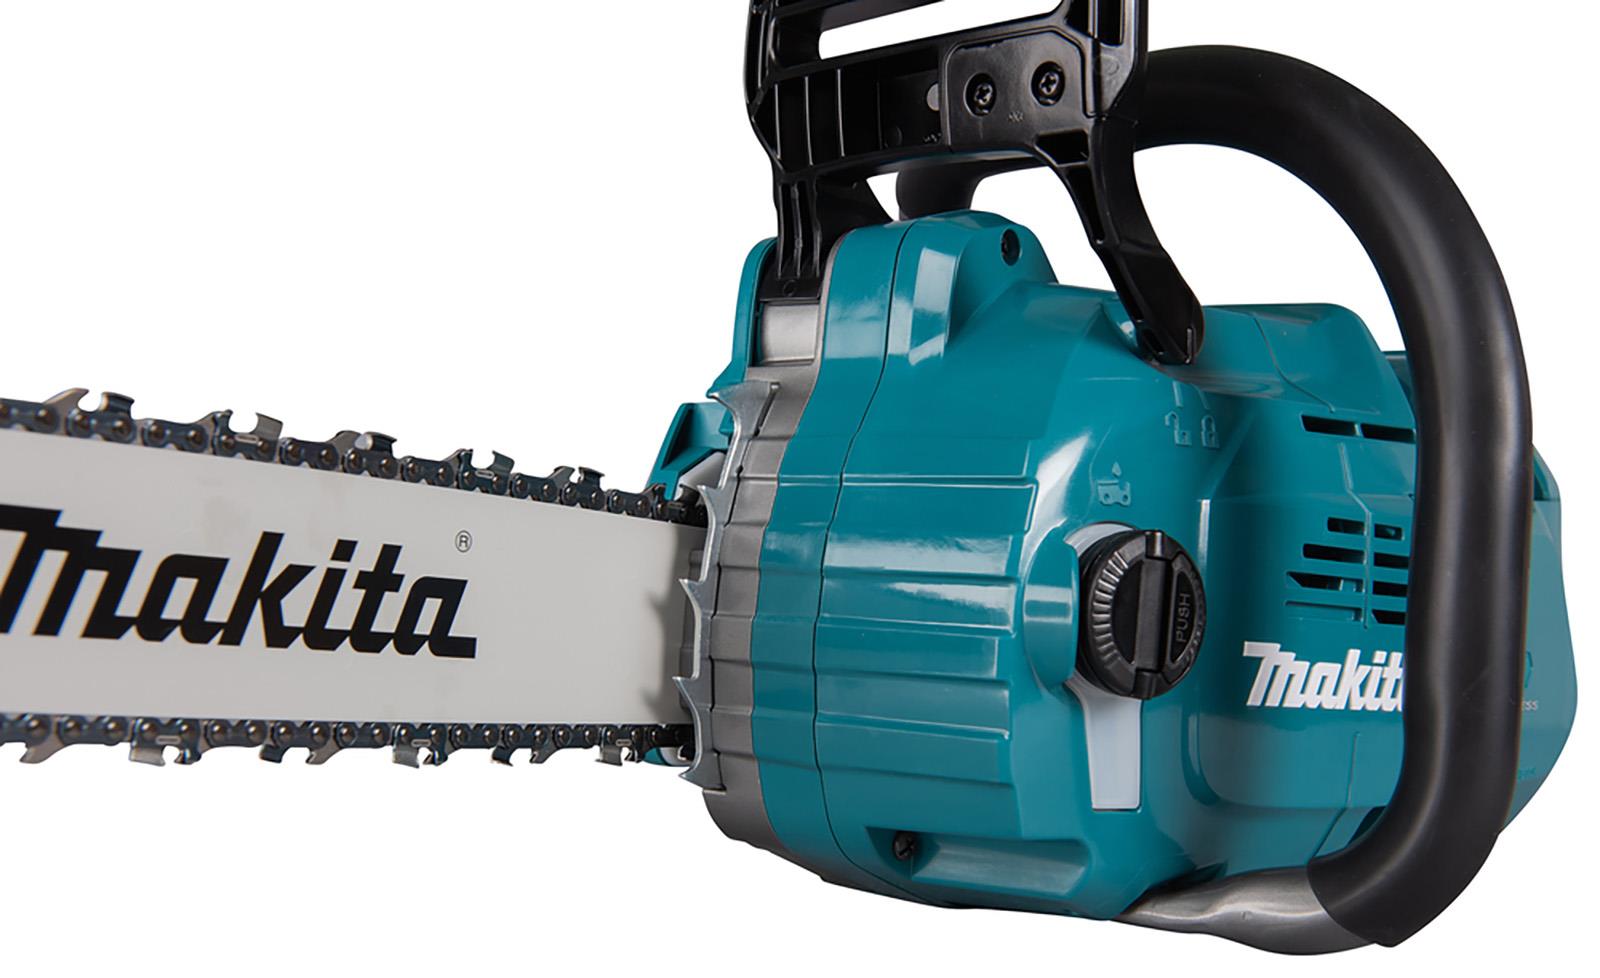 Makita Chainsaw Kit Heavy Duty 35cm 14" 40V XGT Brushless Cordless 2 x 5Ah Battery and Rapid Charger Garden Tree Cutting Pruning UC011GT201